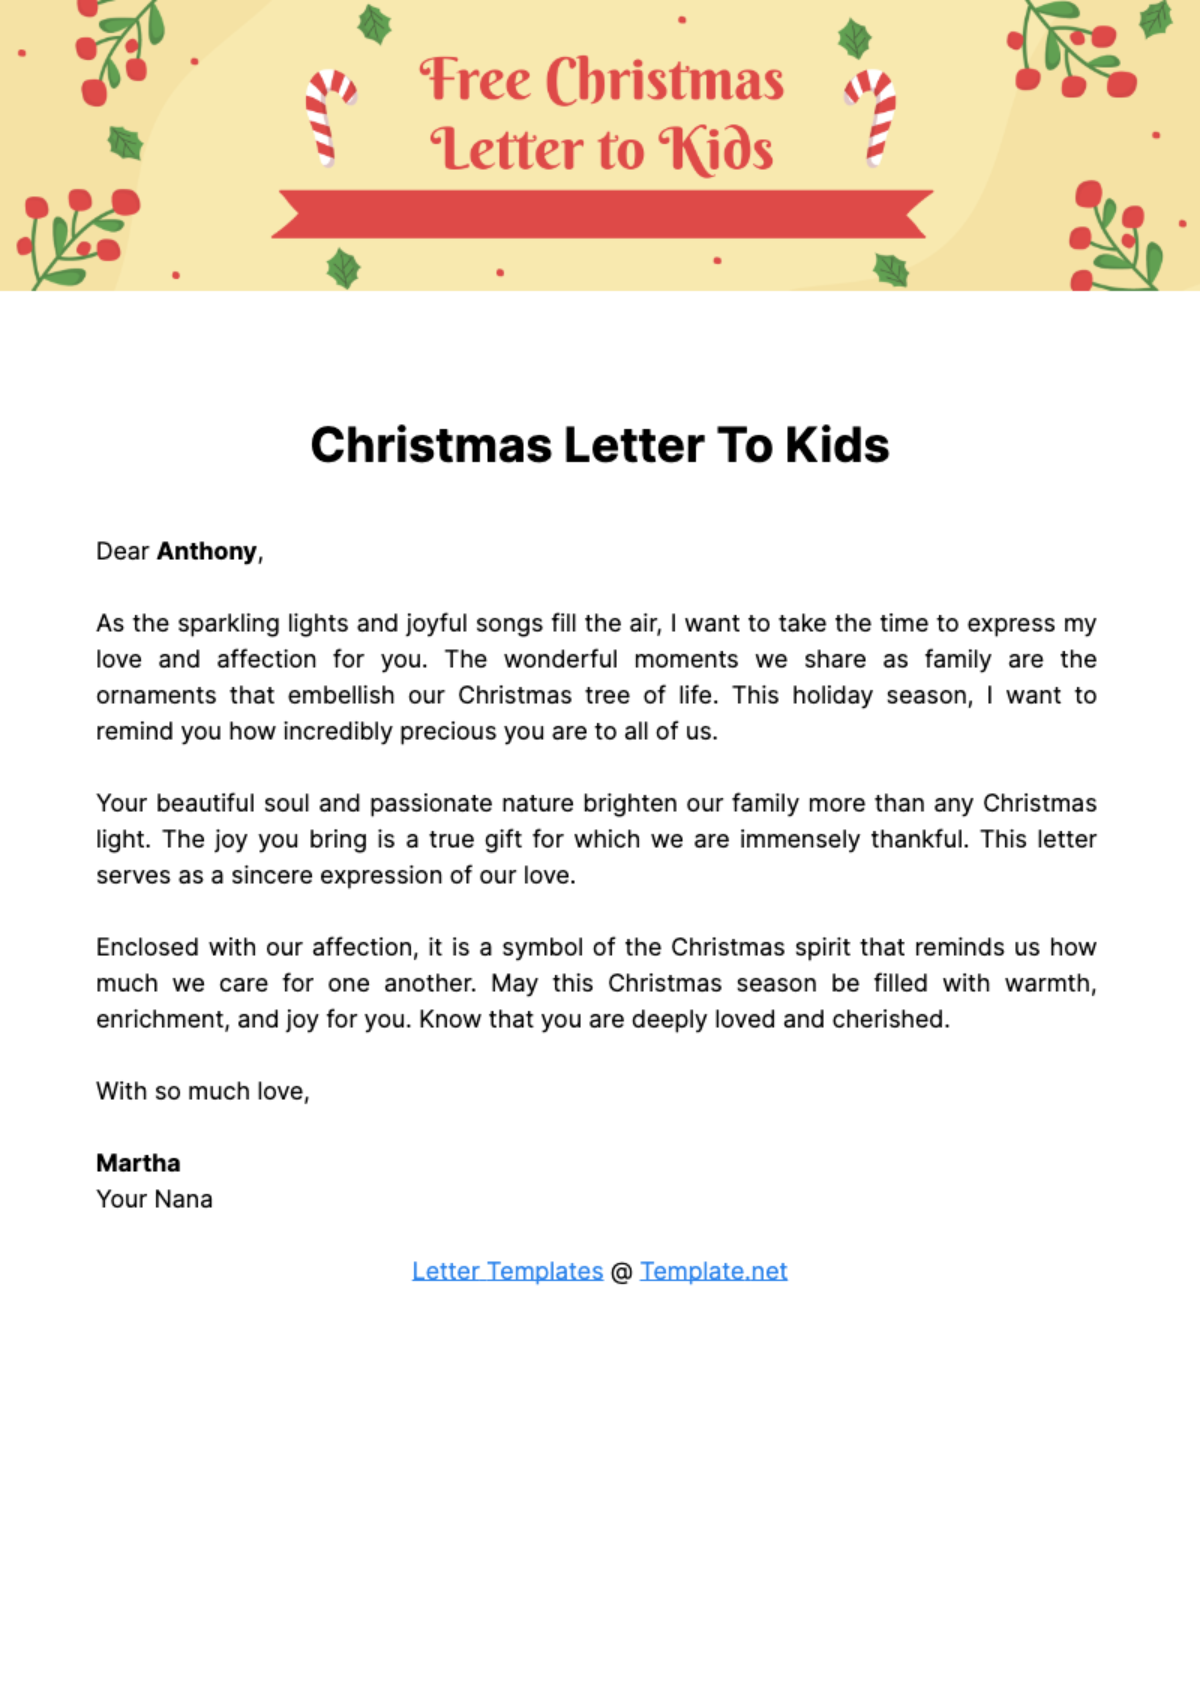 Free Christmas Letter to Kids Template